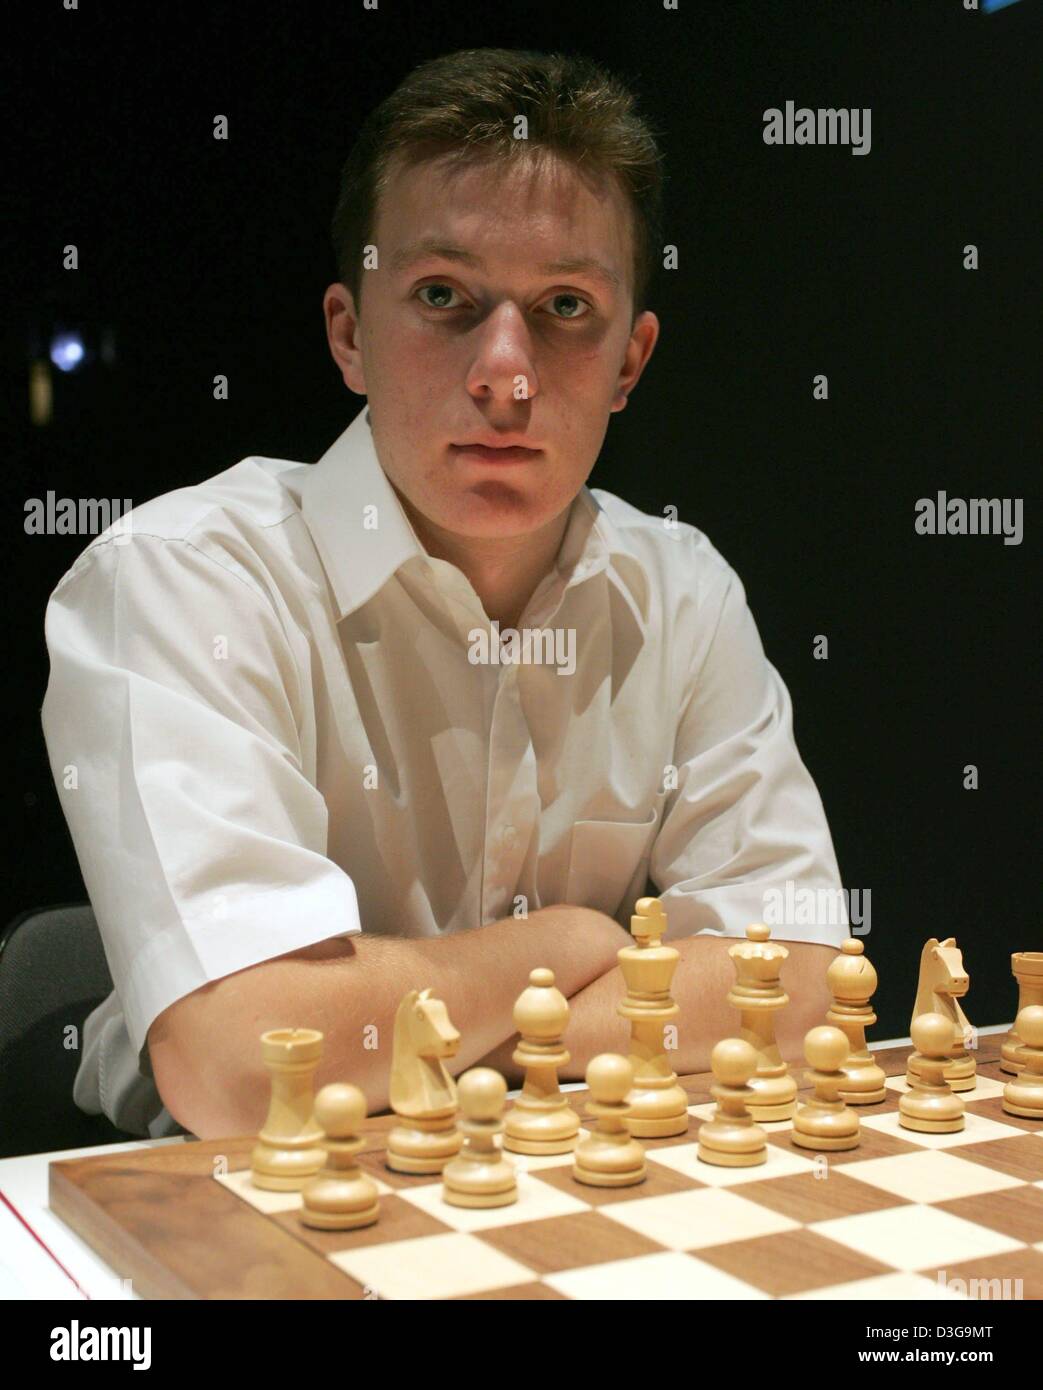 (dpa) - Local favourite Arkadij Naiditsch sits in front of a chess board during the 2004 Dortmund Chess Meeting in Dortmund, Germany, 23 April 2004. Naiditsch, who was born in Latvia and now lives in Dortmund, is considered one of Germany's top chess talents. Stock Photo